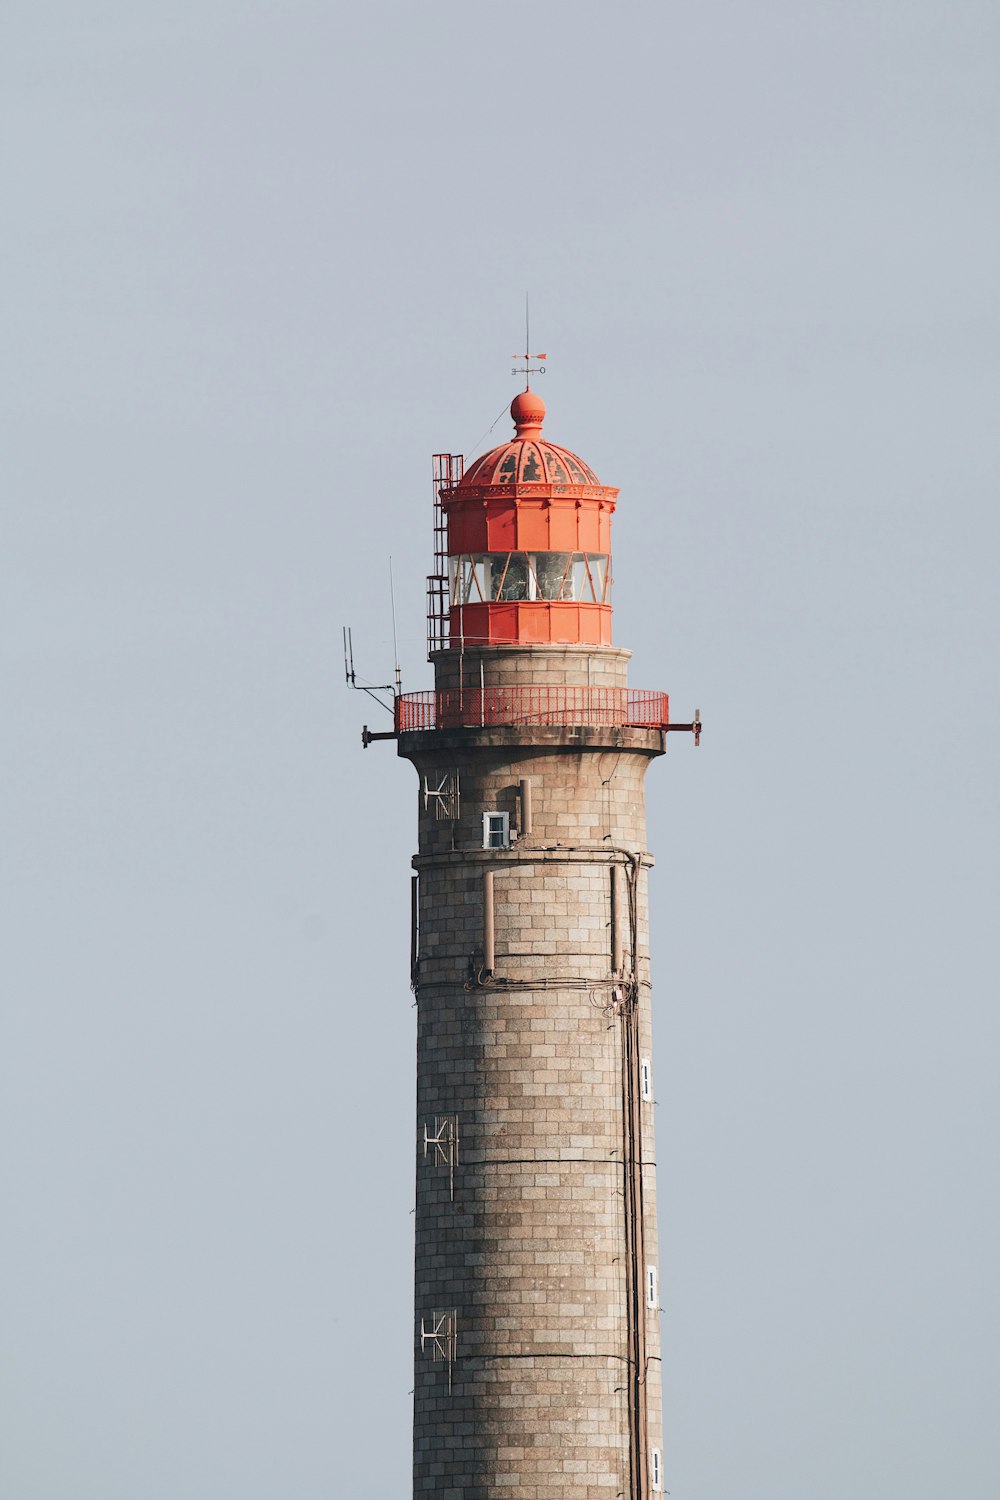 a tall tower with a red top